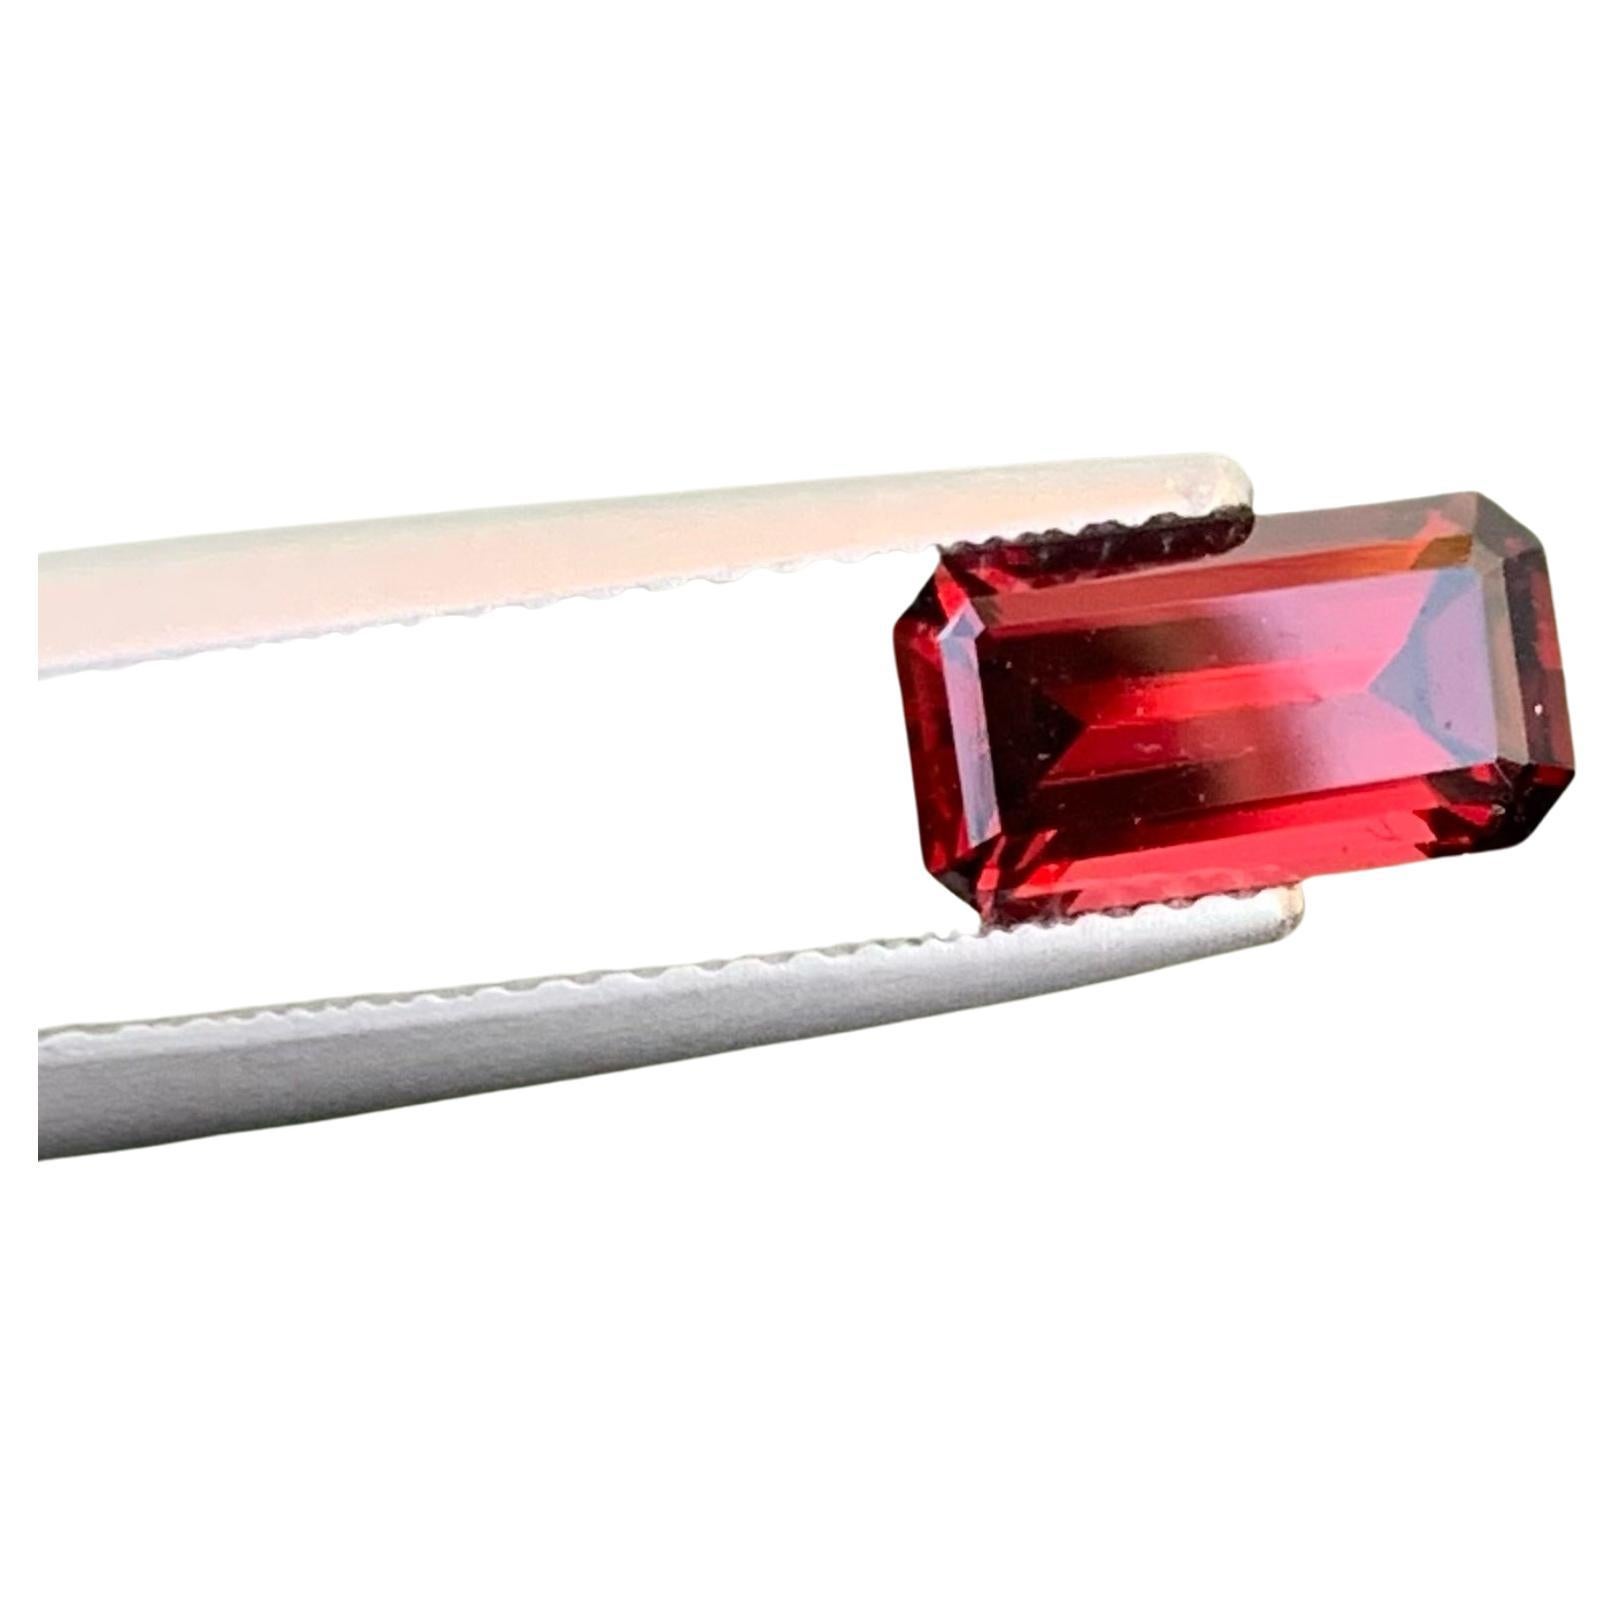 Spectacular Red Garnet For Jewelry 1.95 Carats AAA Eye Clean Loose Garnet Stone For Sale